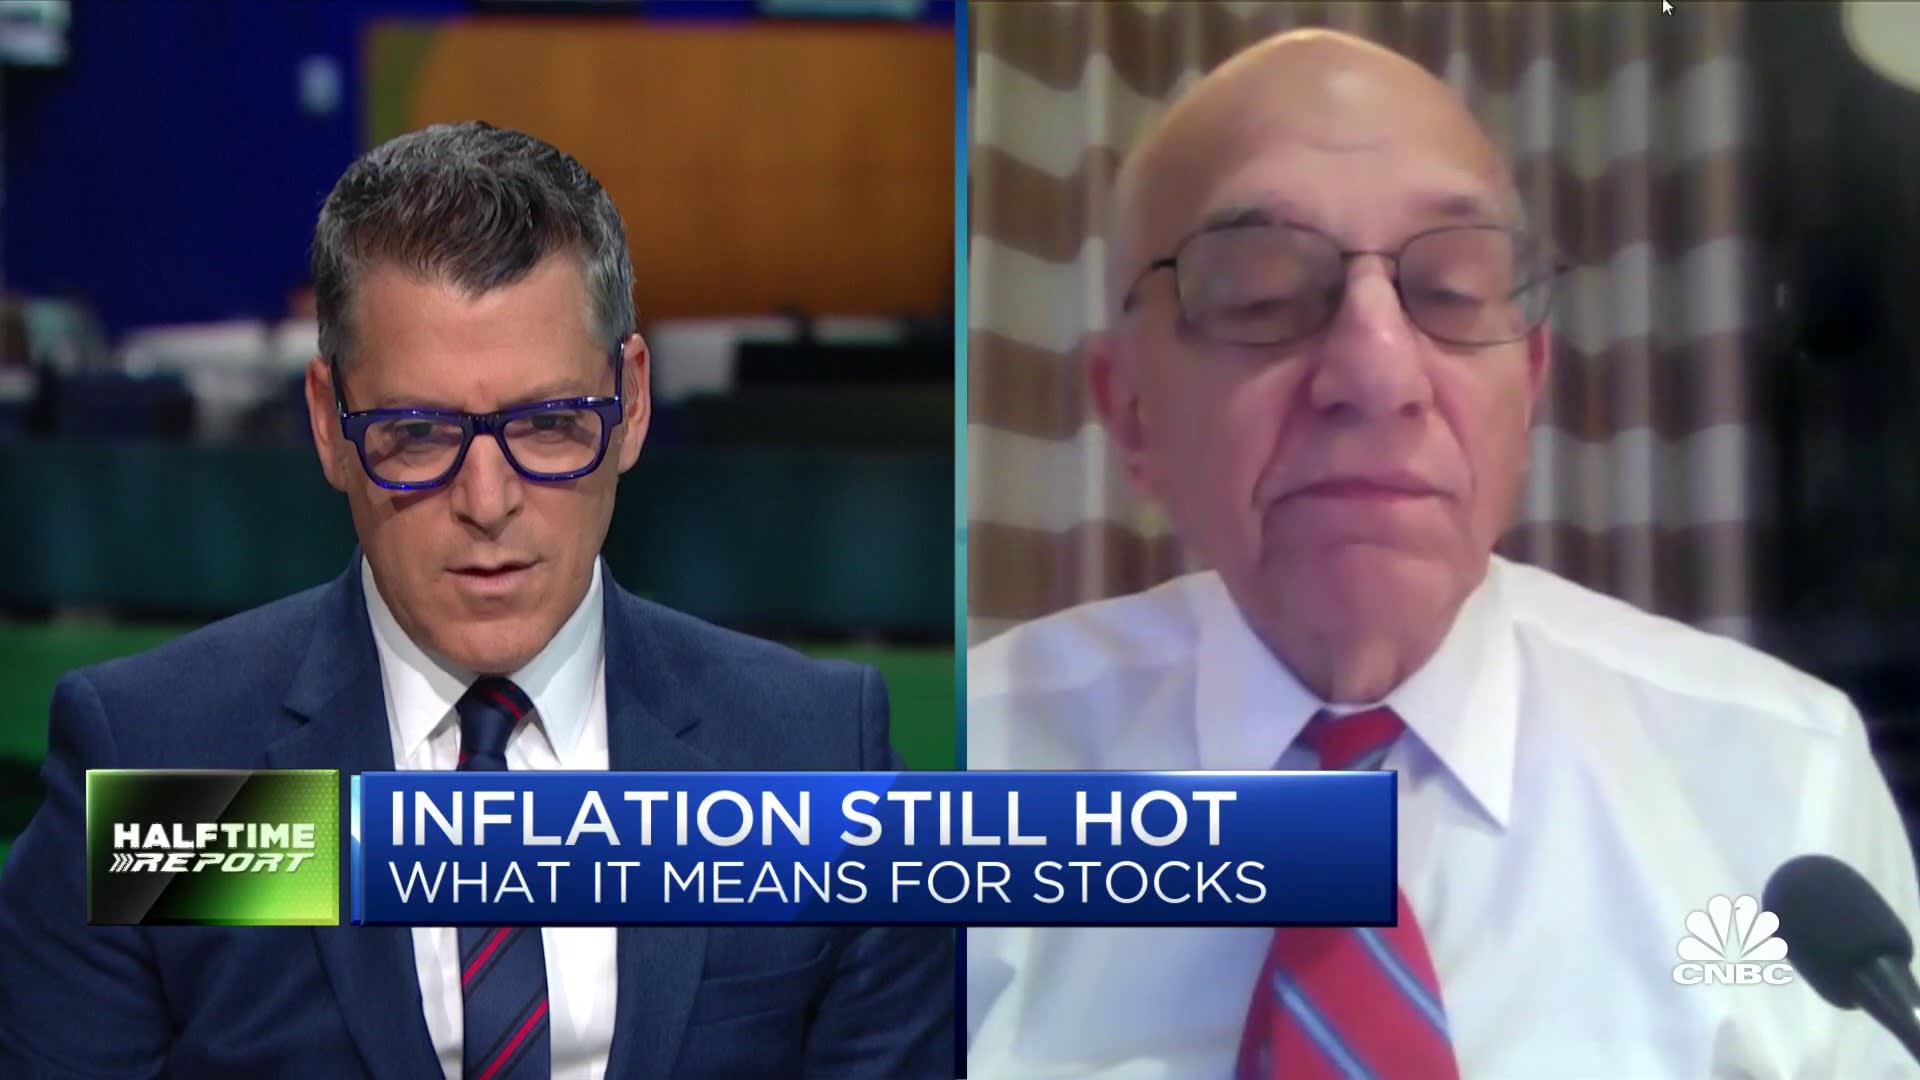 jeremy-siegel-if-the-fed-waits-for-core-inflation-to-hit-2-it-ll-drive-economy-into-depression